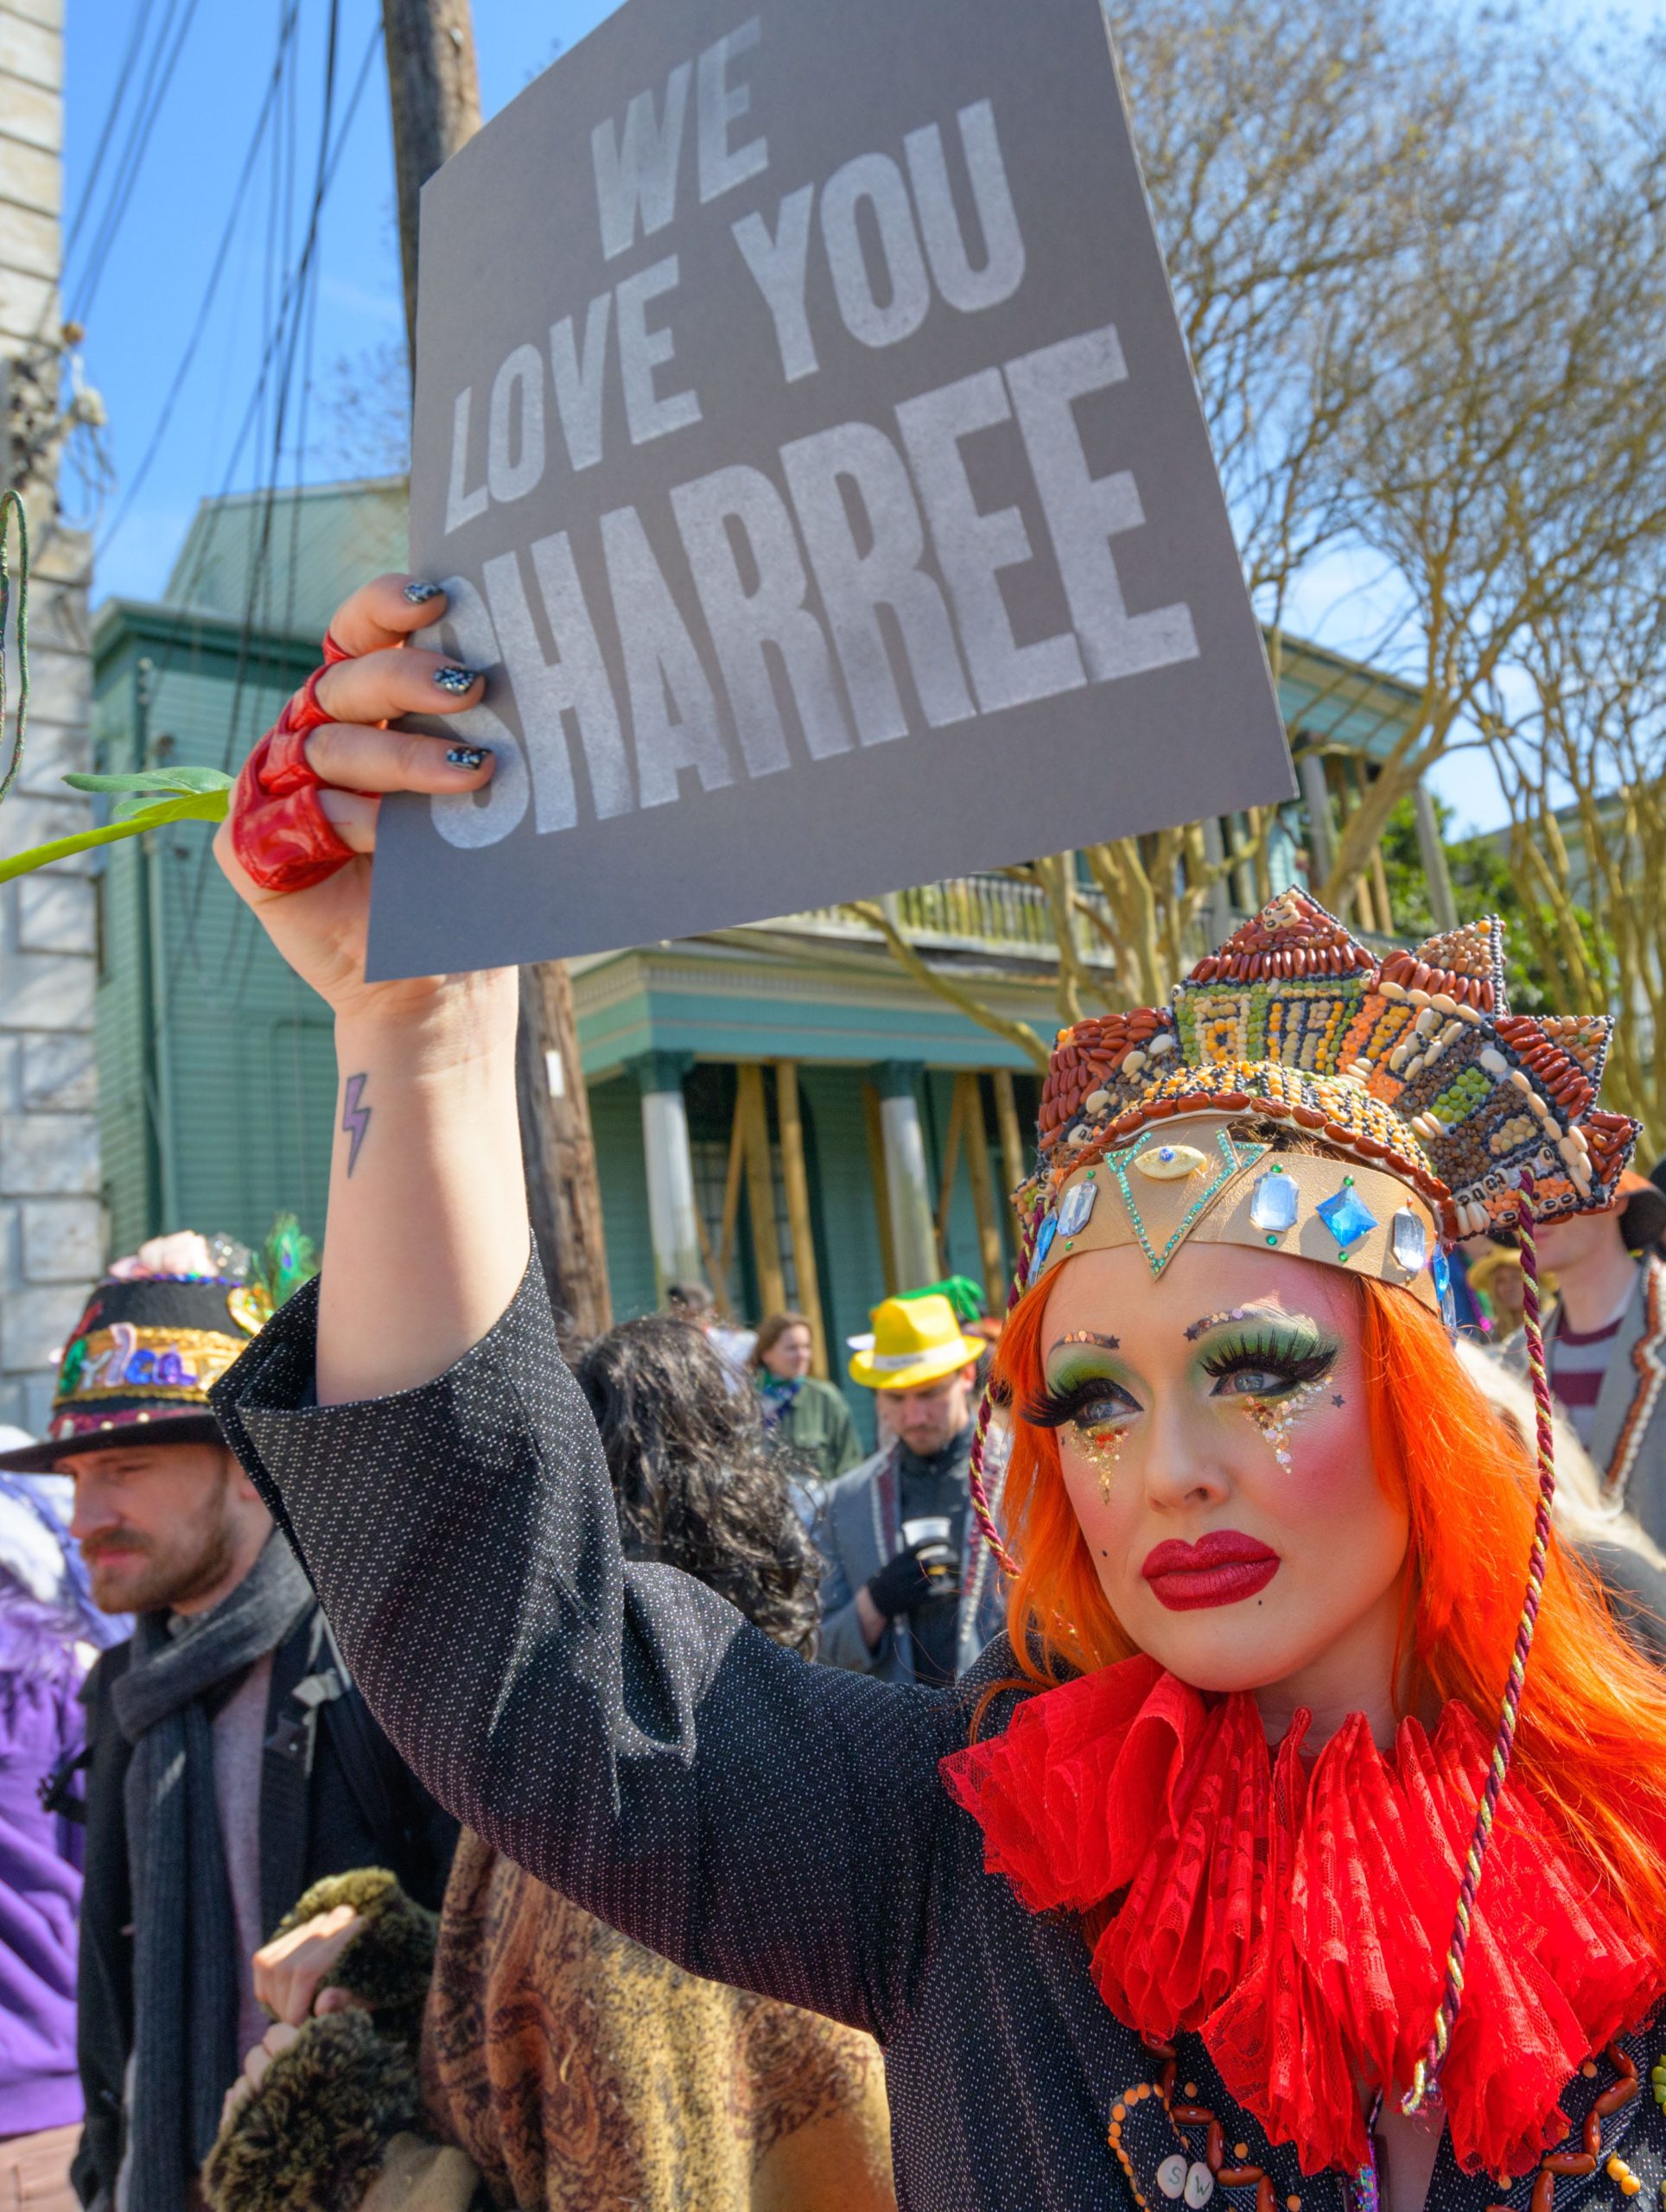 The Krewe of Red Beans paraded through the Marigny on Lundi Gras in New Orleans, La. Monday, March 4, 2019. Many of the Krewe honored Sharree Walls, 27, who was a member of the Krewe and was killed by a suspected drunk driver on Saturday after the Endymion parade.  Photo by Matthew Hinton